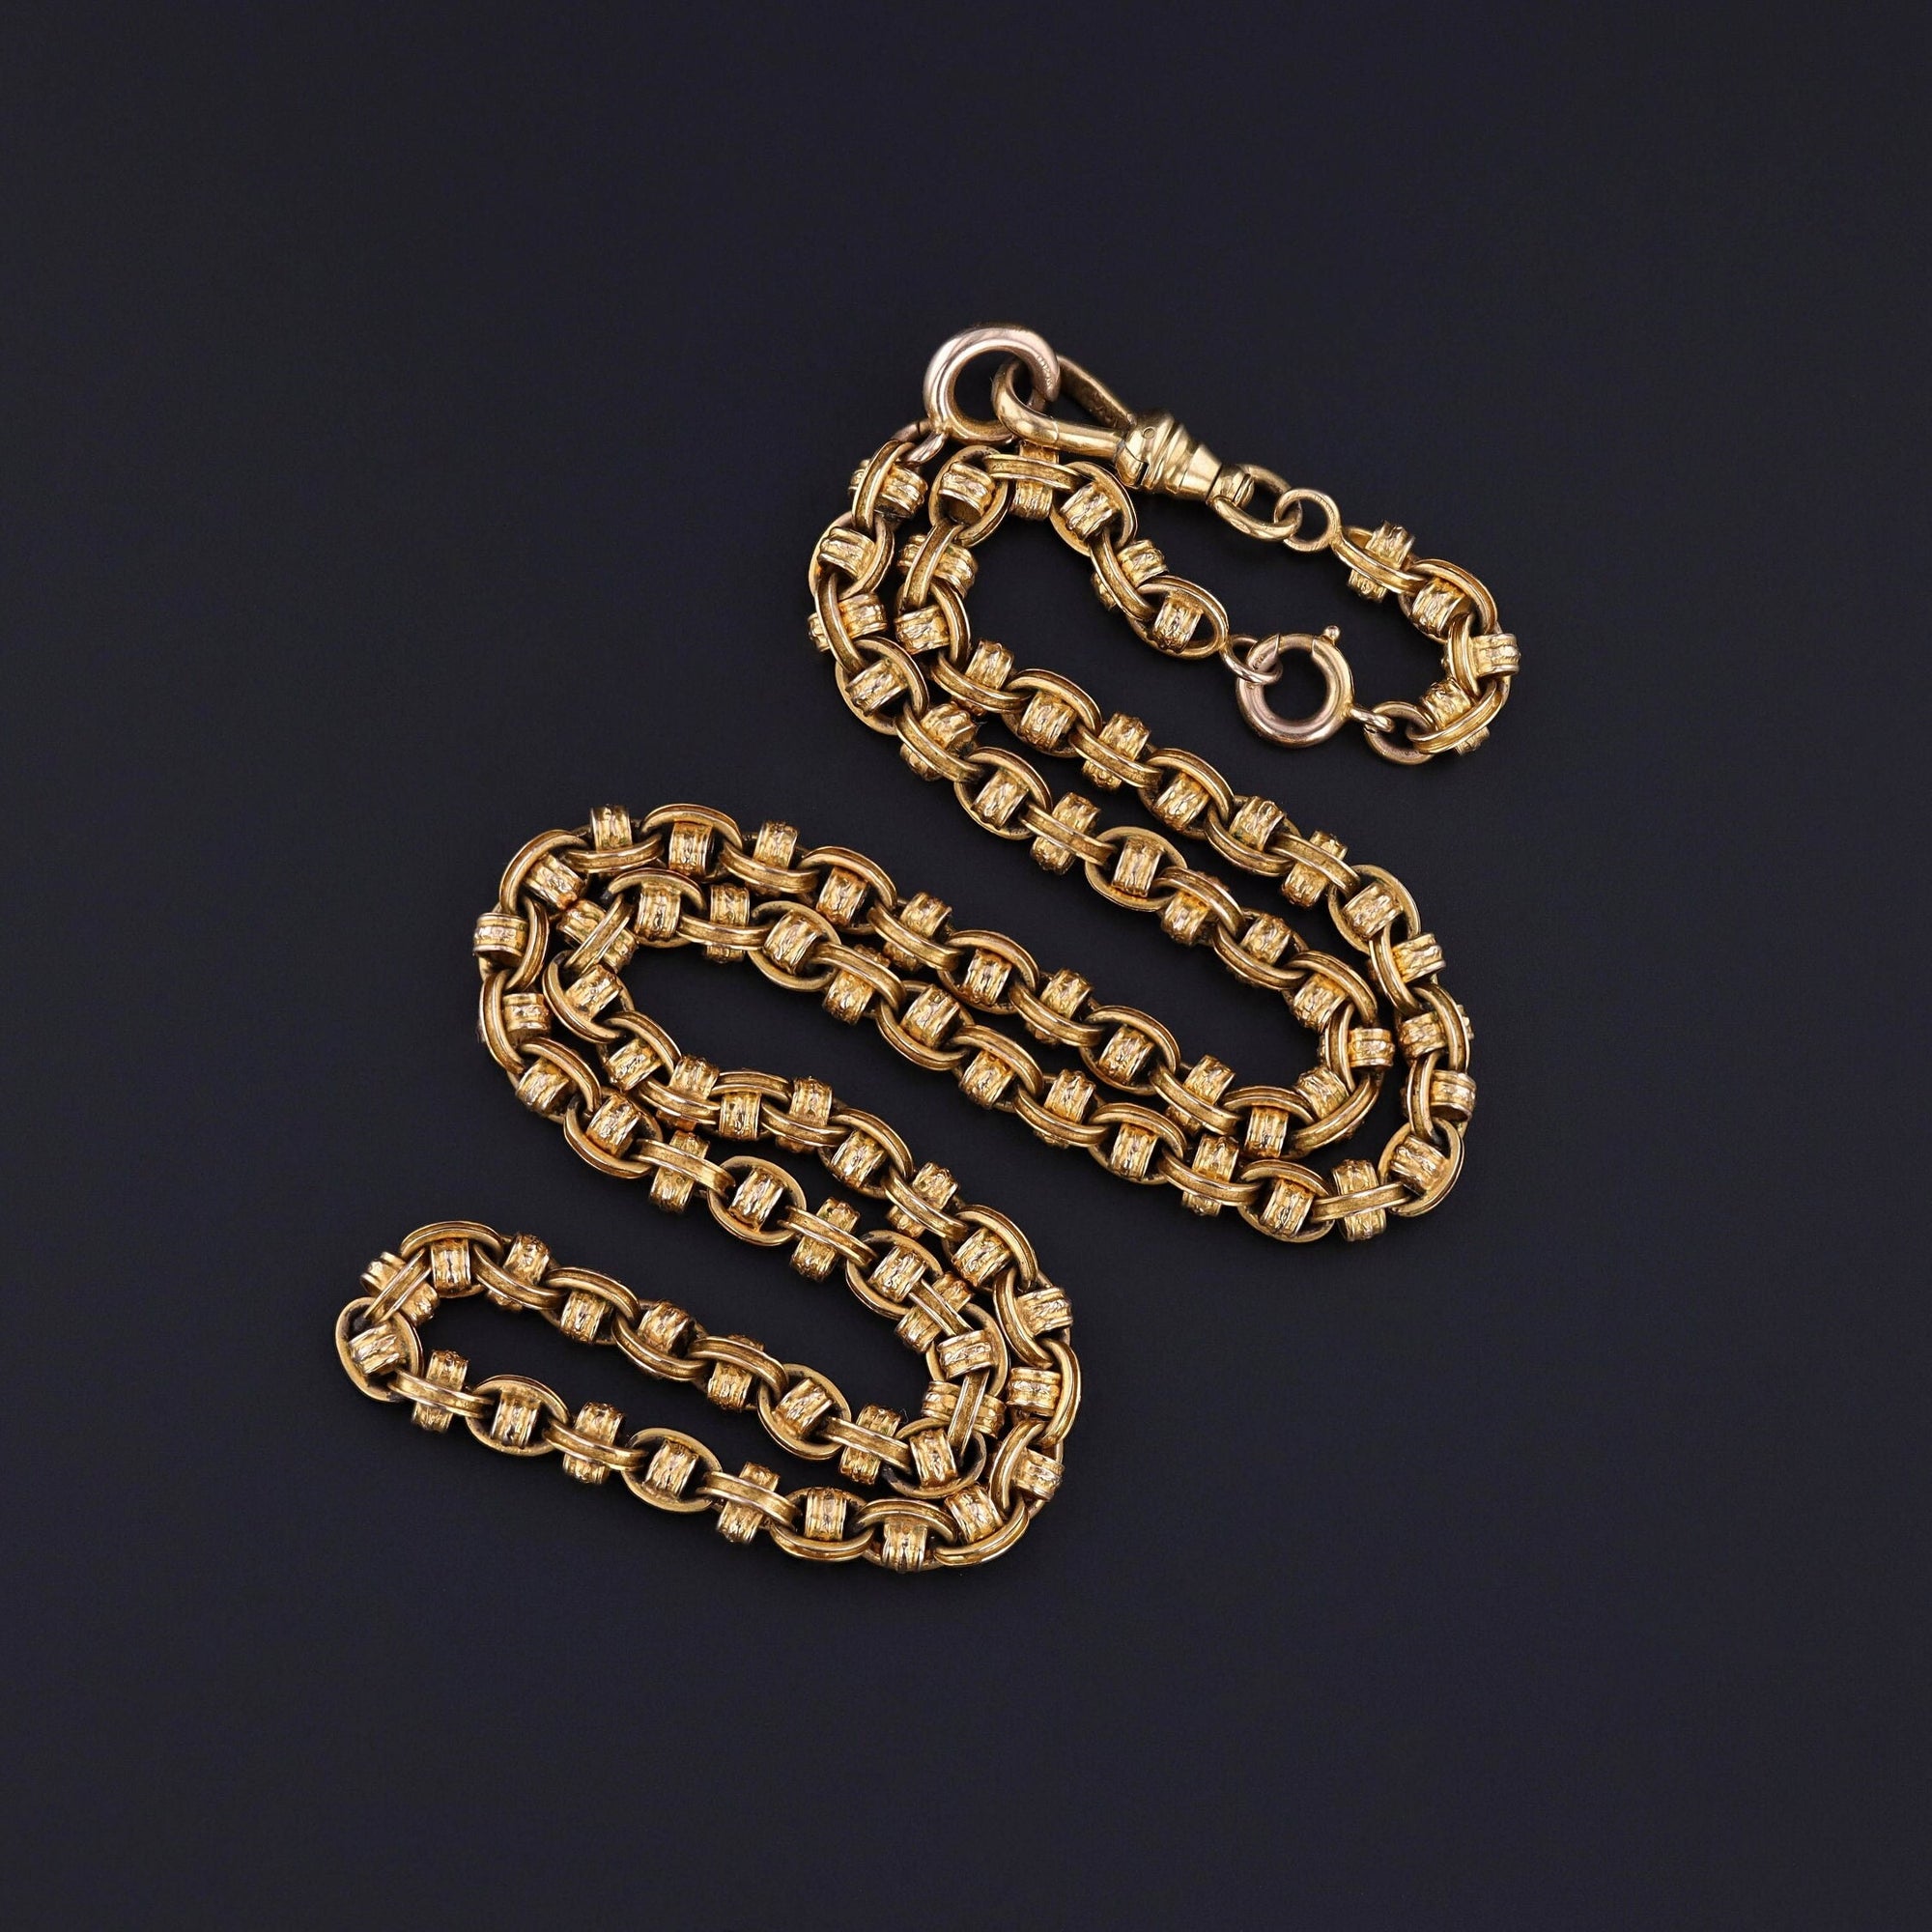 An antique fancy link chain dating to the late Victorian era (circa 1890-1900). It can be worn at 18 inches by removing the chain extender or at 20 inches (with the chain extender). It can also be worn as an 18 inch chain with a 2.25 inch drop.